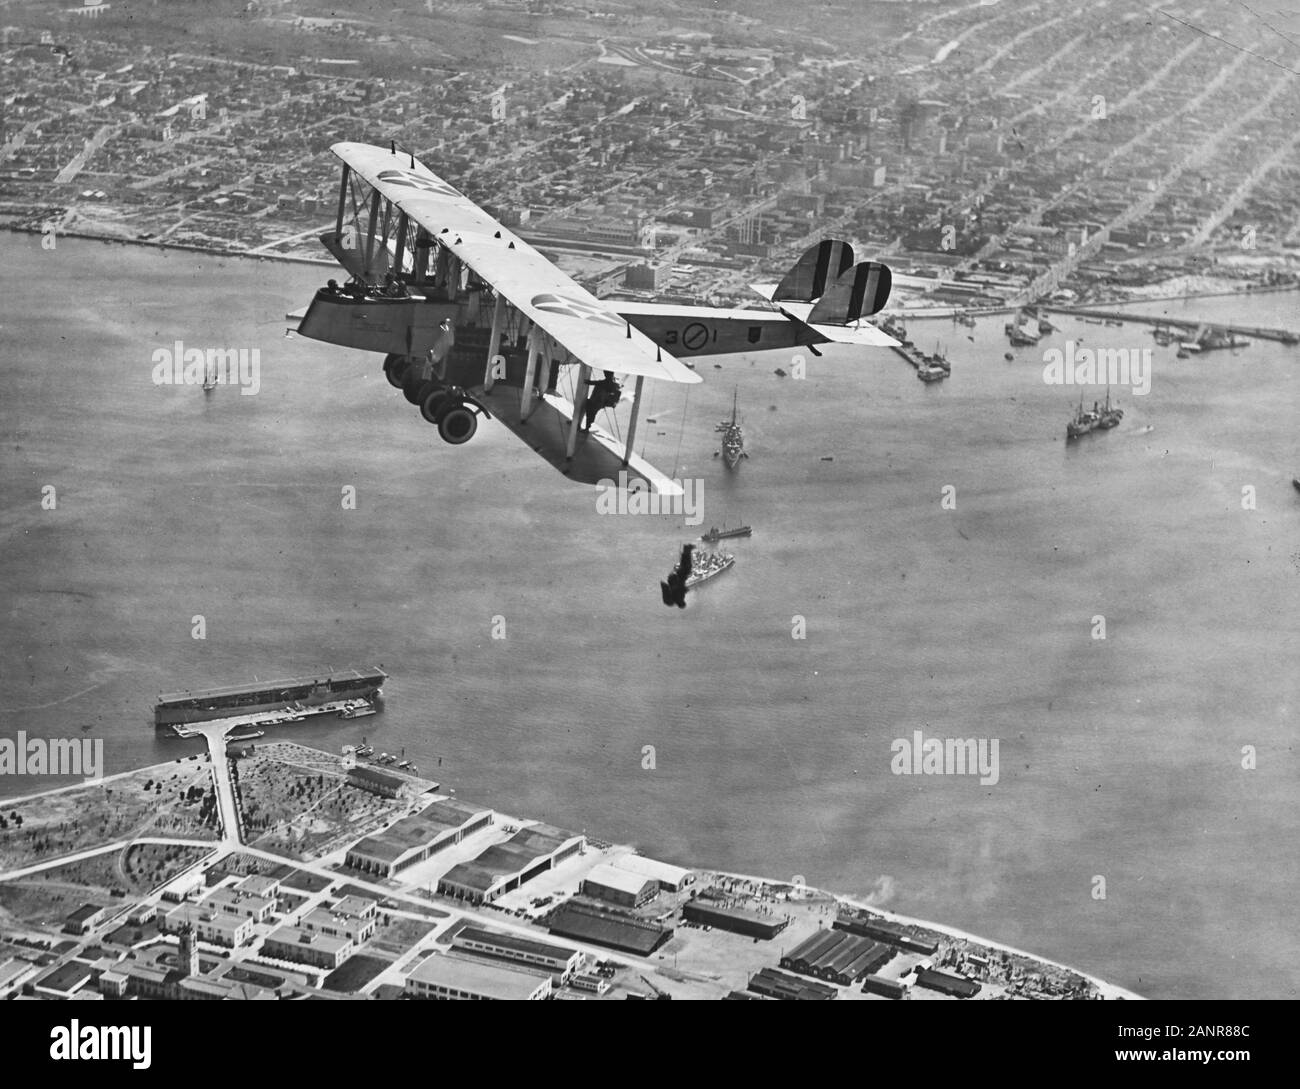 Martin MT bomber Dropping parachutists over Naval Air Station North Island, San Diego, California, during the early 1920s. One of these men is AMM2 T.D. Ferguson. Note USS Langley (CV-1) docked below. Stock Photo